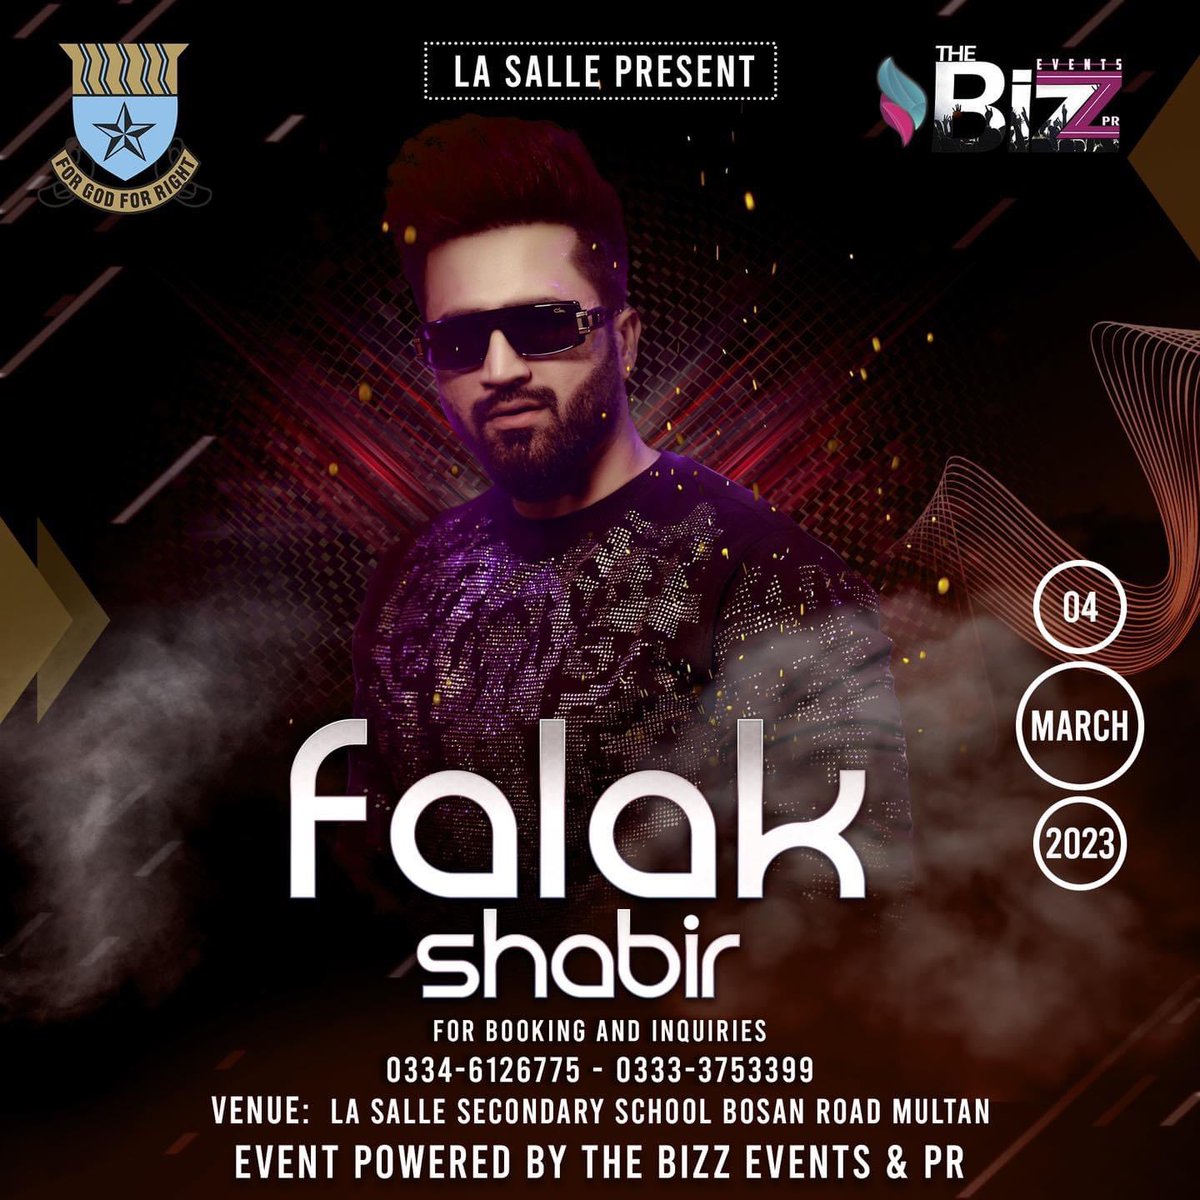 Lasalle! Bizz Events & PR is all set to bring Falak Shabir on 4th March, 2023. Come, witness & be the part of the zeal.

#falakshabir #thebizzeventspr #bizzevents